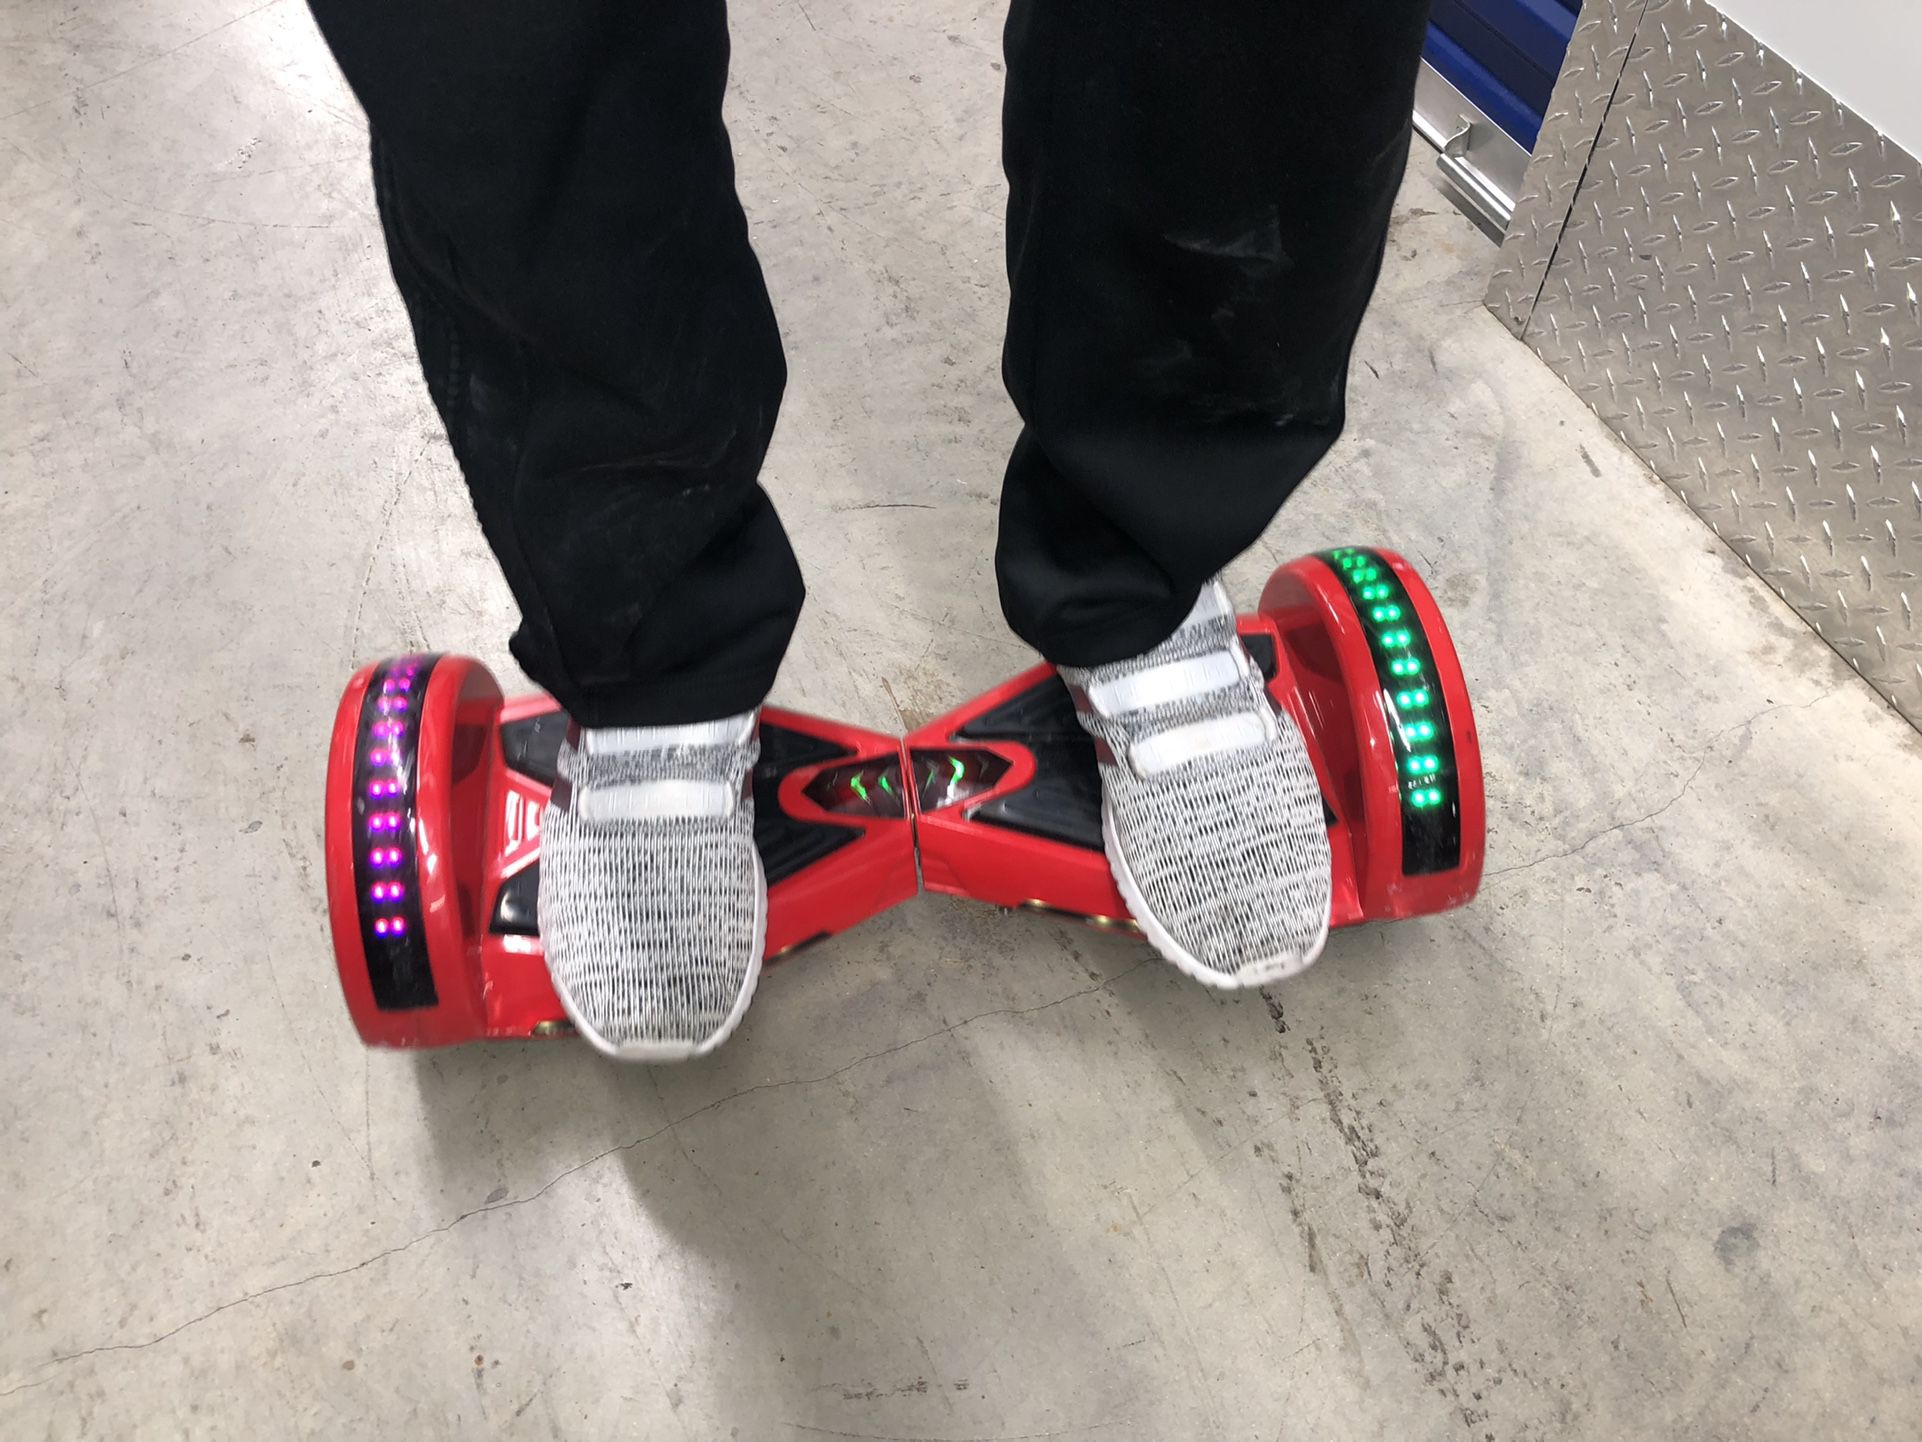 Hoverboard with Bluetooth speaker and White LED lights